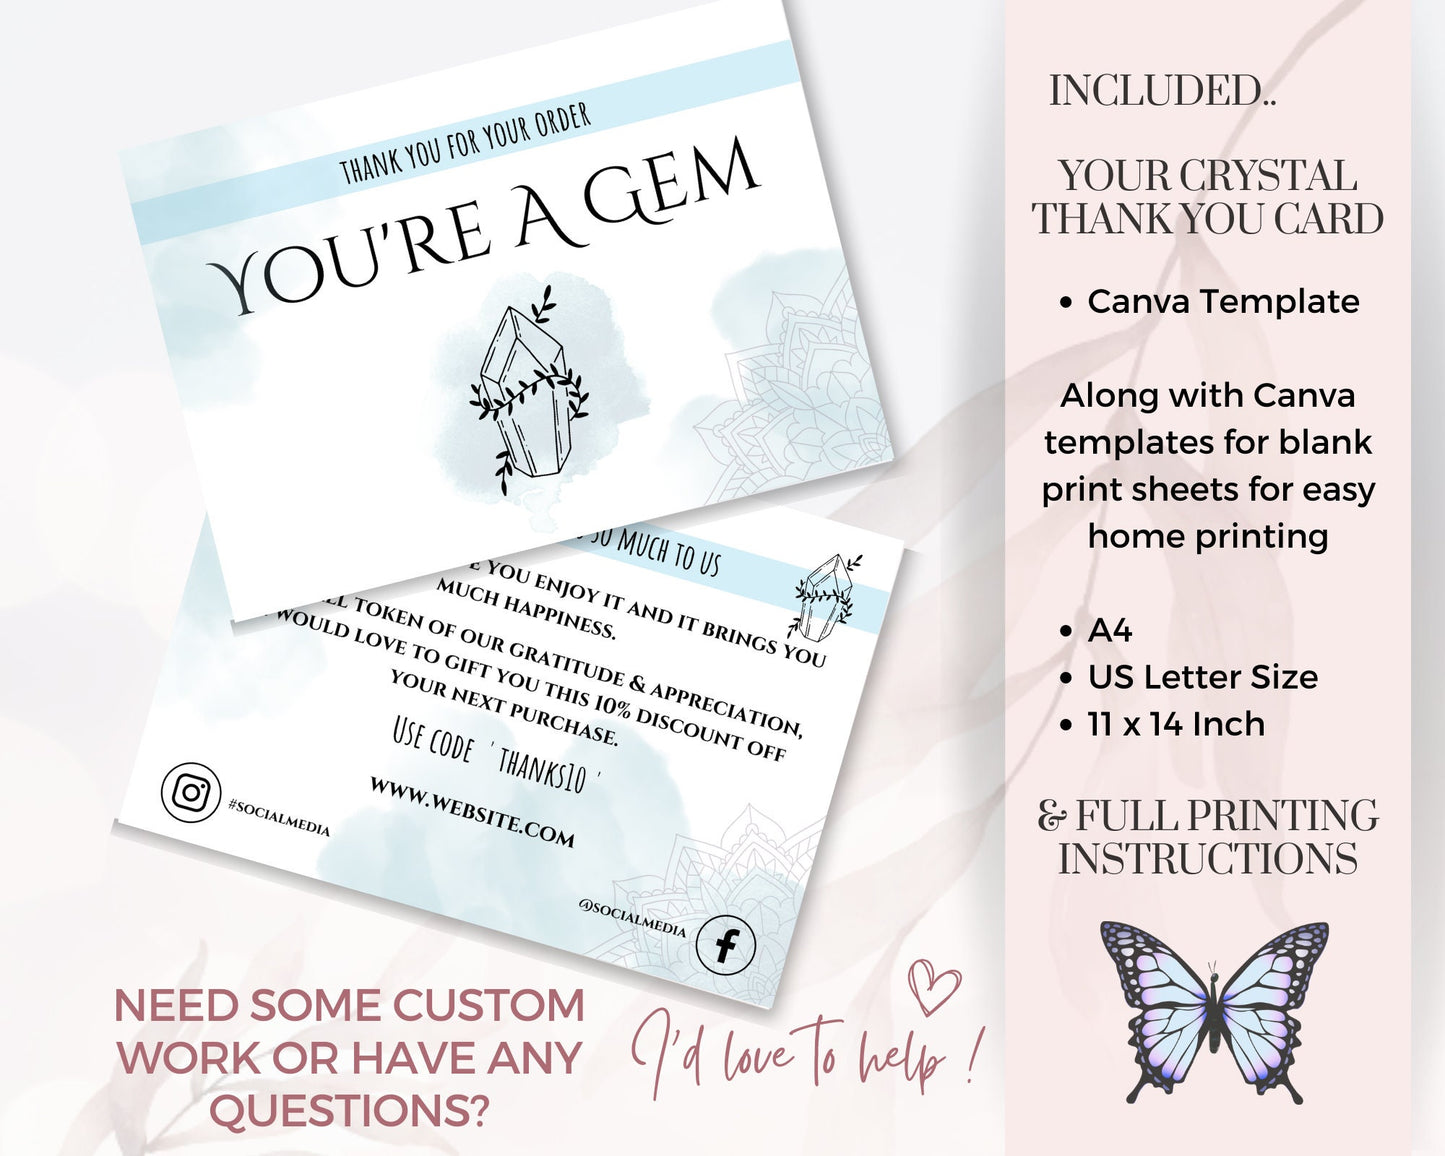 Crystal Thank You Card, You're a Gem, Thank you insert for your Crystal business, printable thank you for your order, crystal thank you note